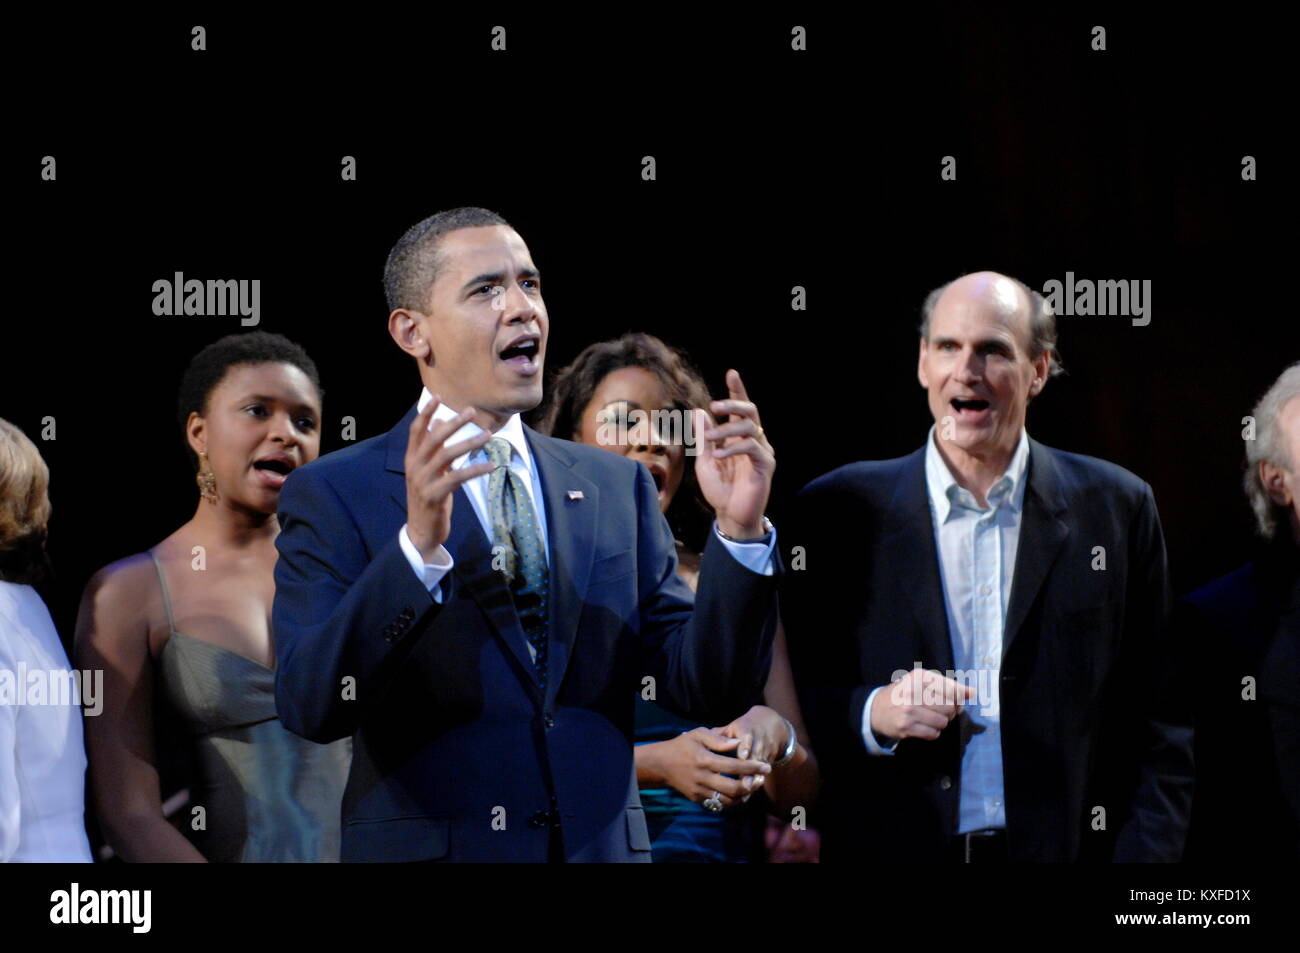 Washington, DC - March 8, 2009 -- United States President Barack Obama (C) joins performers (including James Taylor (R)) on stage to lead in singing 'Happy Birthday' to Senator Ted Kennedy (Democrat- Massachusetts)  at a musical tribute to celebrate Kennedy's birthday at the Kennedy Center in Washington, DC., USA, on Sunday, 08 March 2009..Credit: Chris Usher - Pool via CNP /MediaPunch Stock Photo